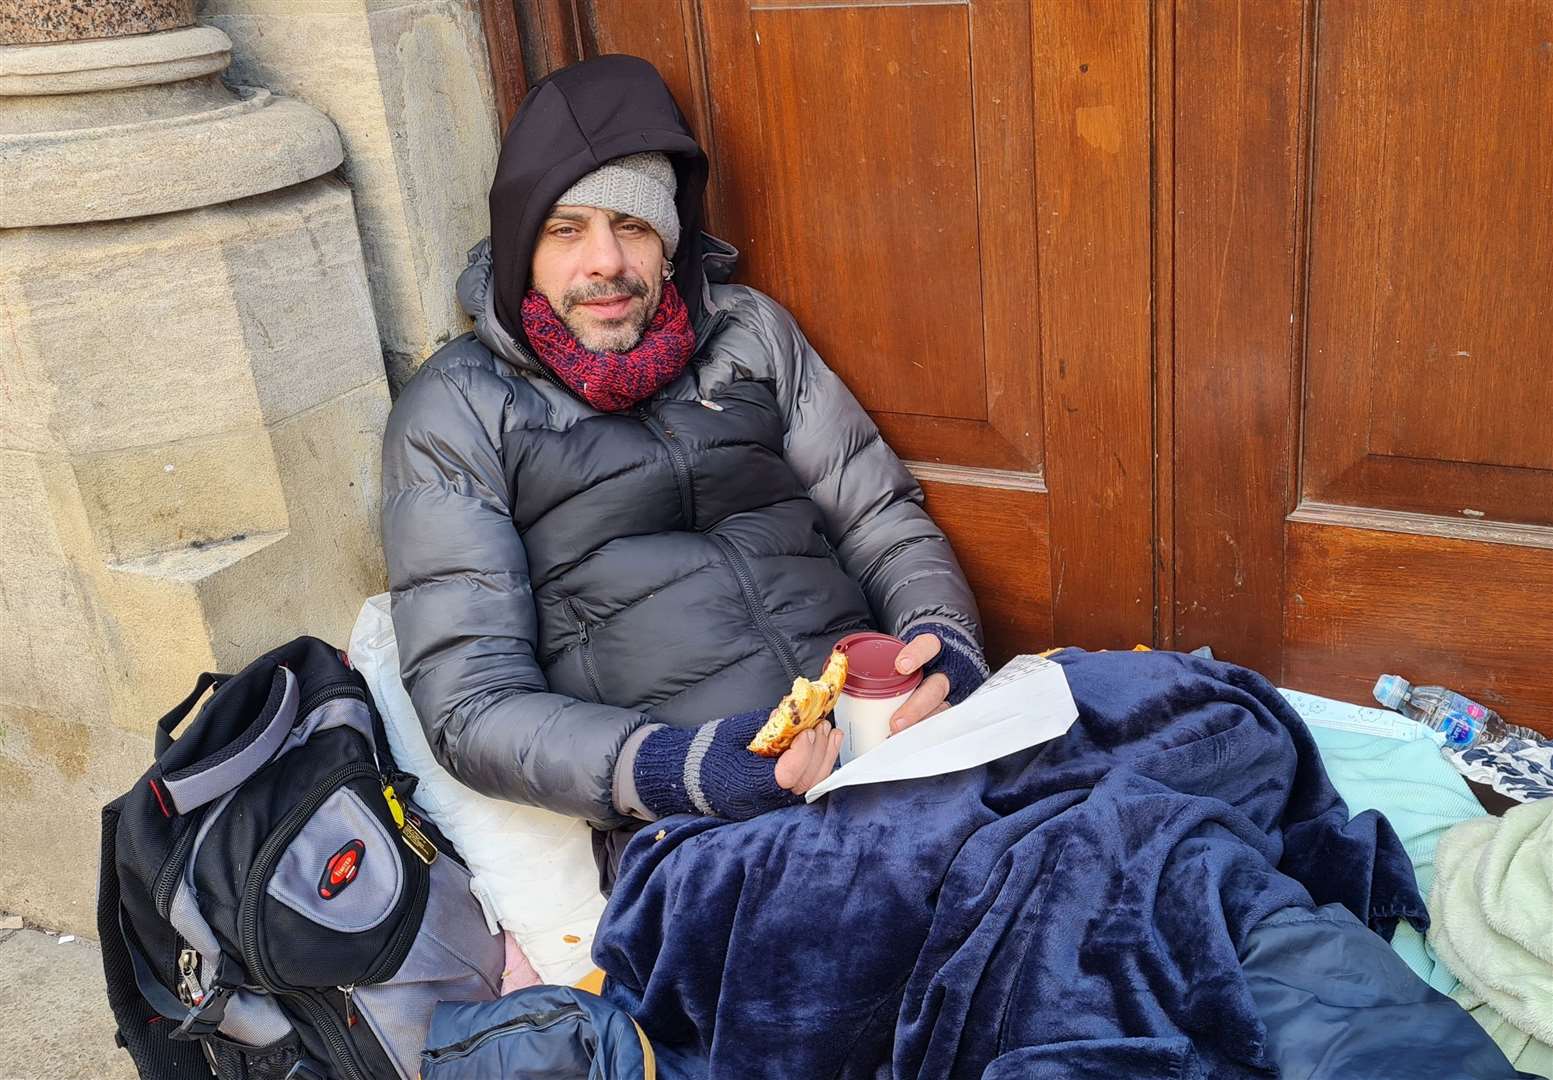 Homeless 'JC' fears he could be classed as a persistent beggar and hit with a fine